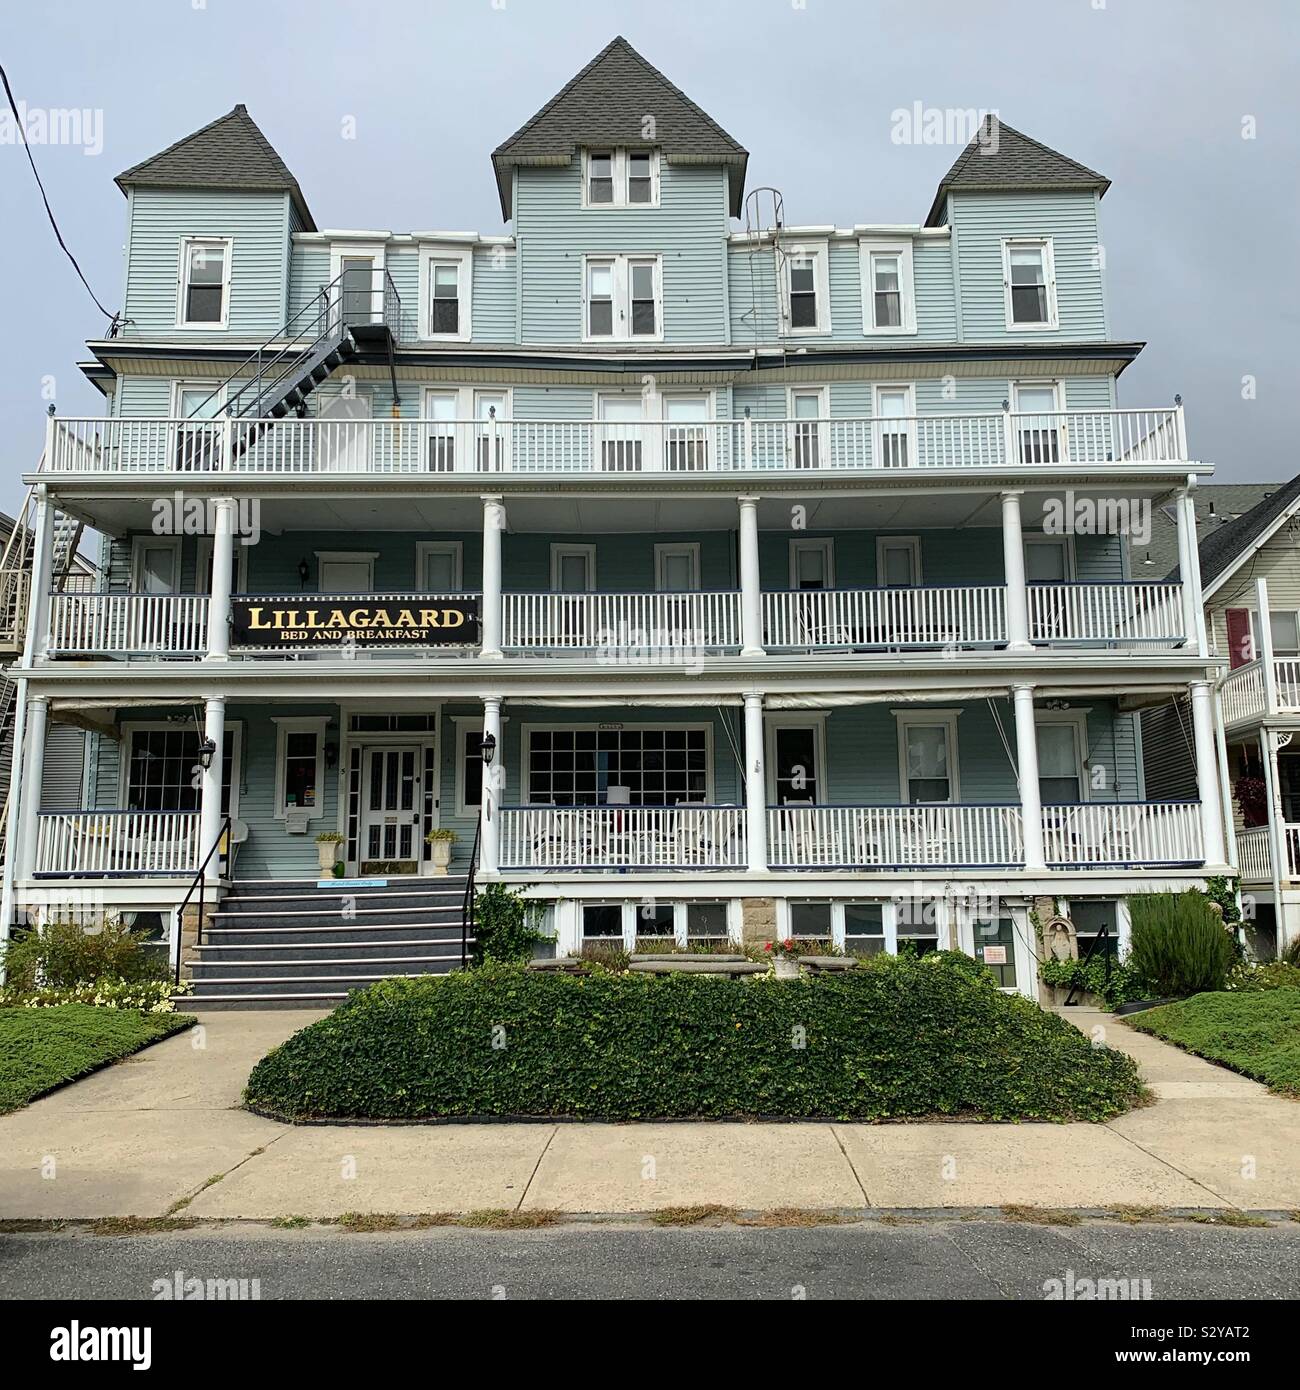 Lillagaard Bed and Breakfast, Ocean Grove, Neptun Township, Monmouth County, New Jersey, United States Stockfoto